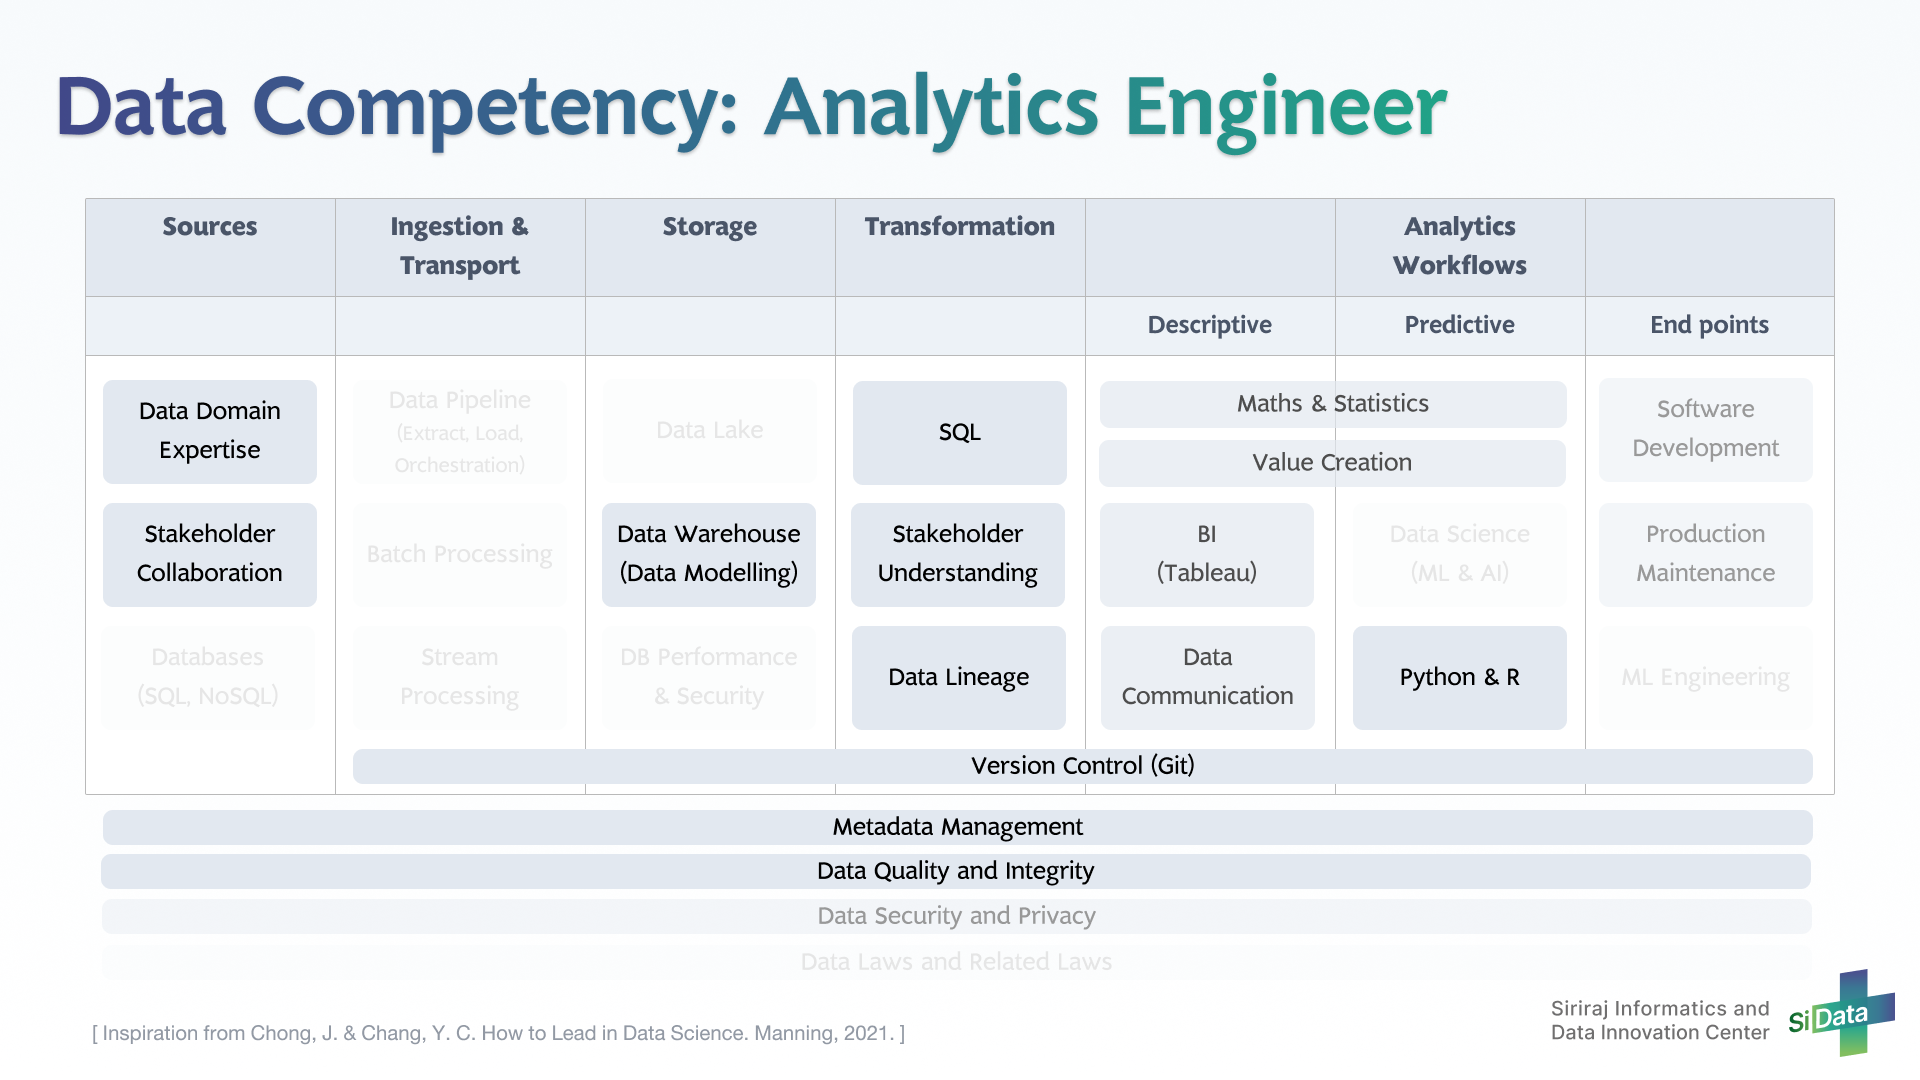 Data Competency_3 Analytics Engineer_20220425.png